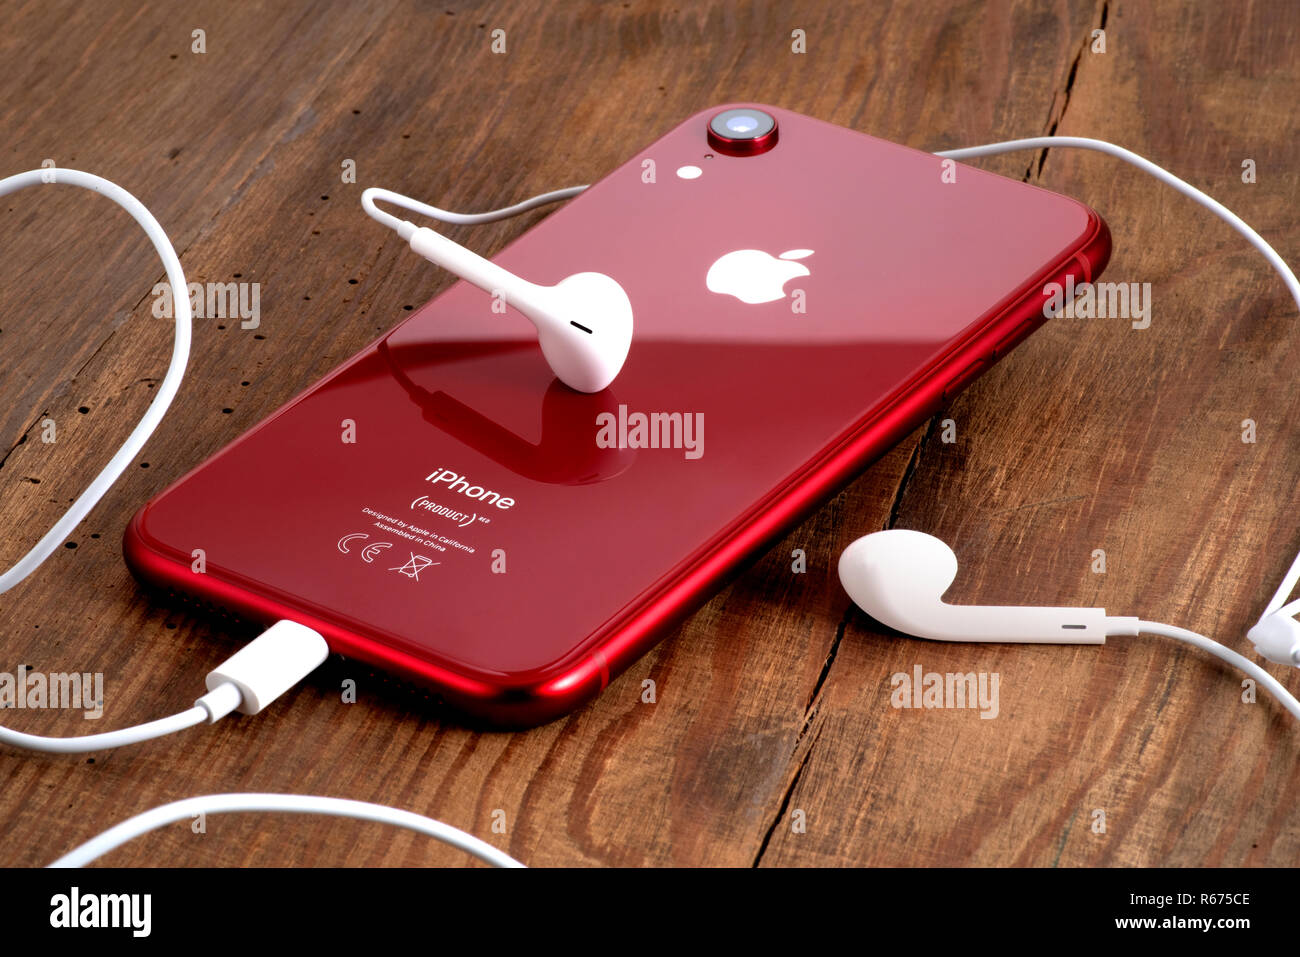 Koszalin, Poland – December 04, 2018: Red iPhone XR on a wooden table with white earphones. The iPhone XR is smart phone with multi touch screen produ Stock Photo